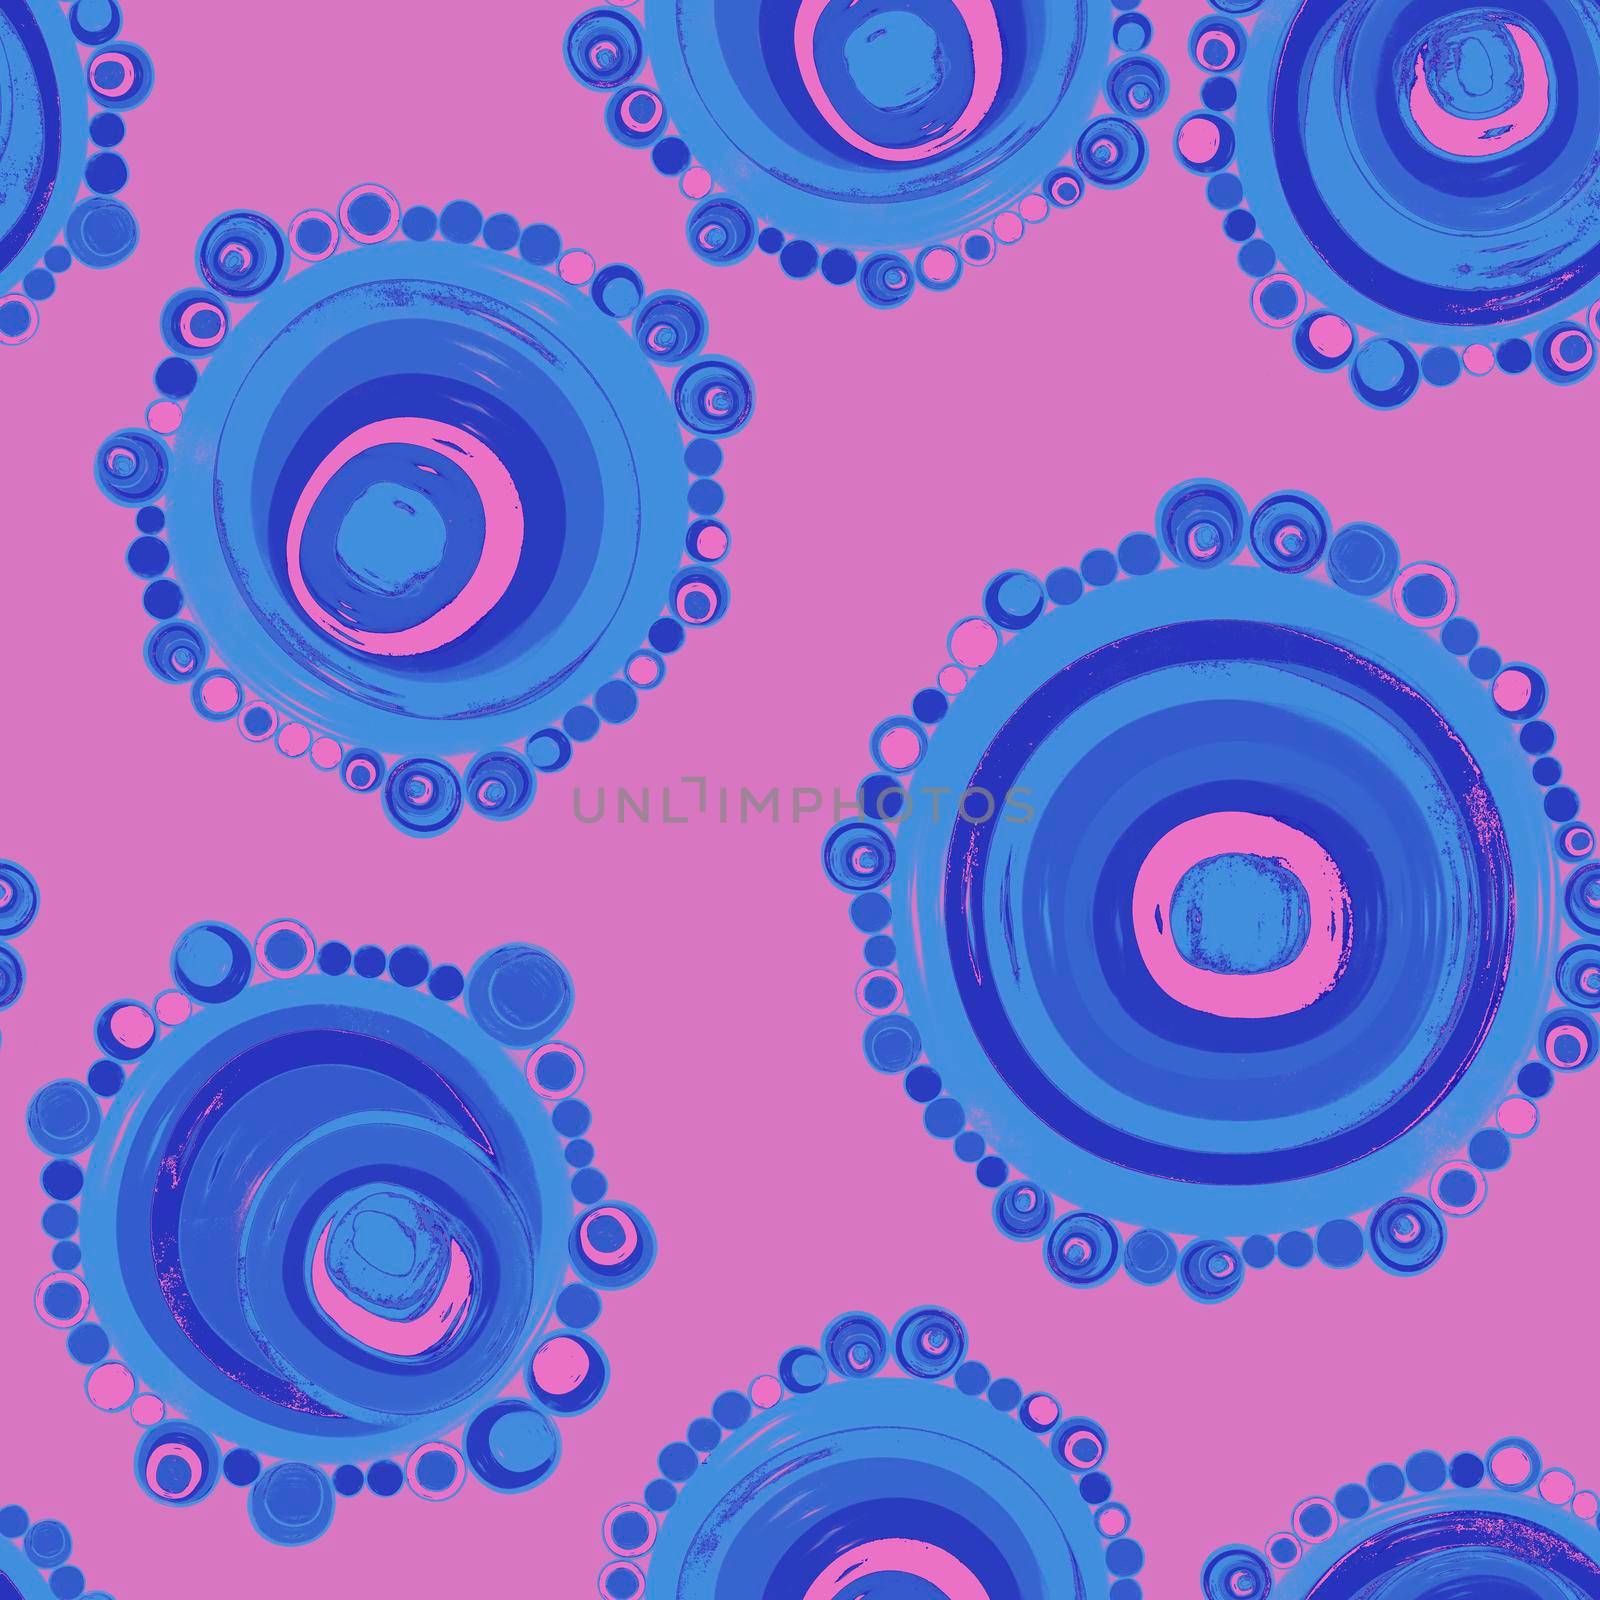 Geometric seamless pattern,texture with perfectly contacting nested circles with different size colors.Repeating pattern with circles filled with dots.For textile,wrapping paper,banner.Azure on pink.